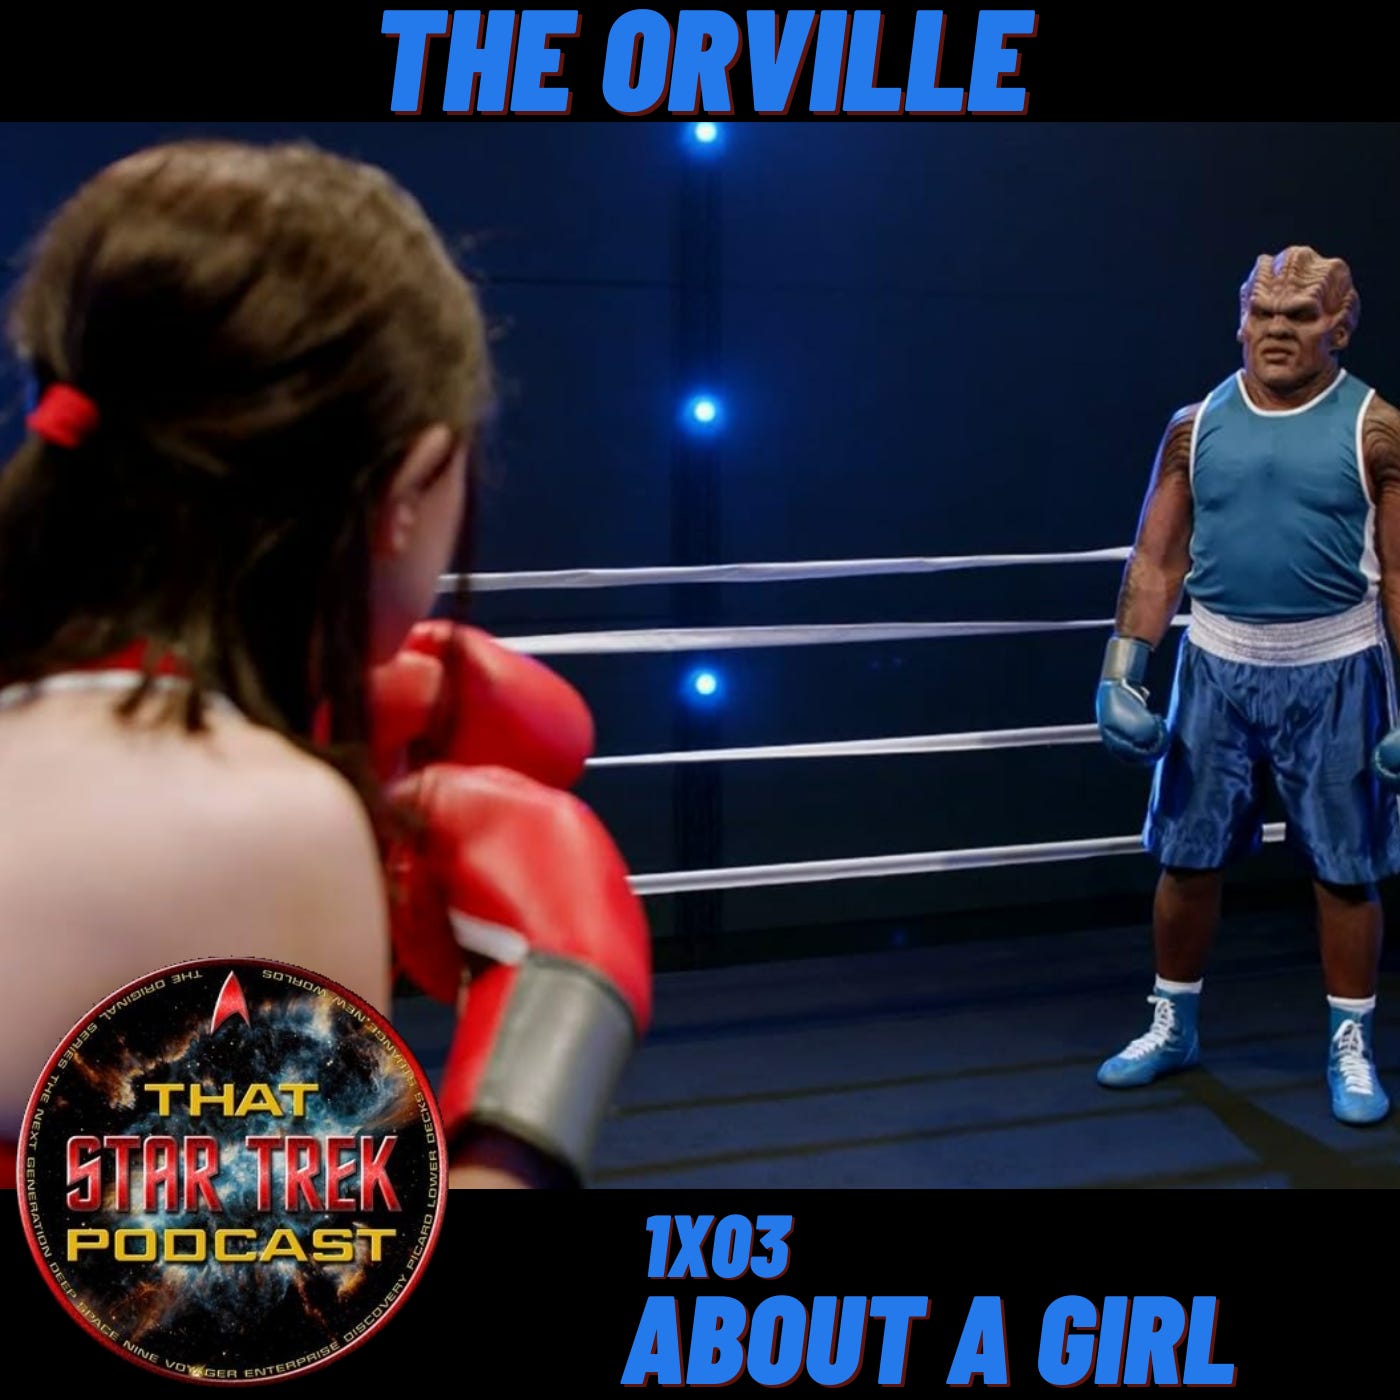 The Orville 1x03: About A Girl